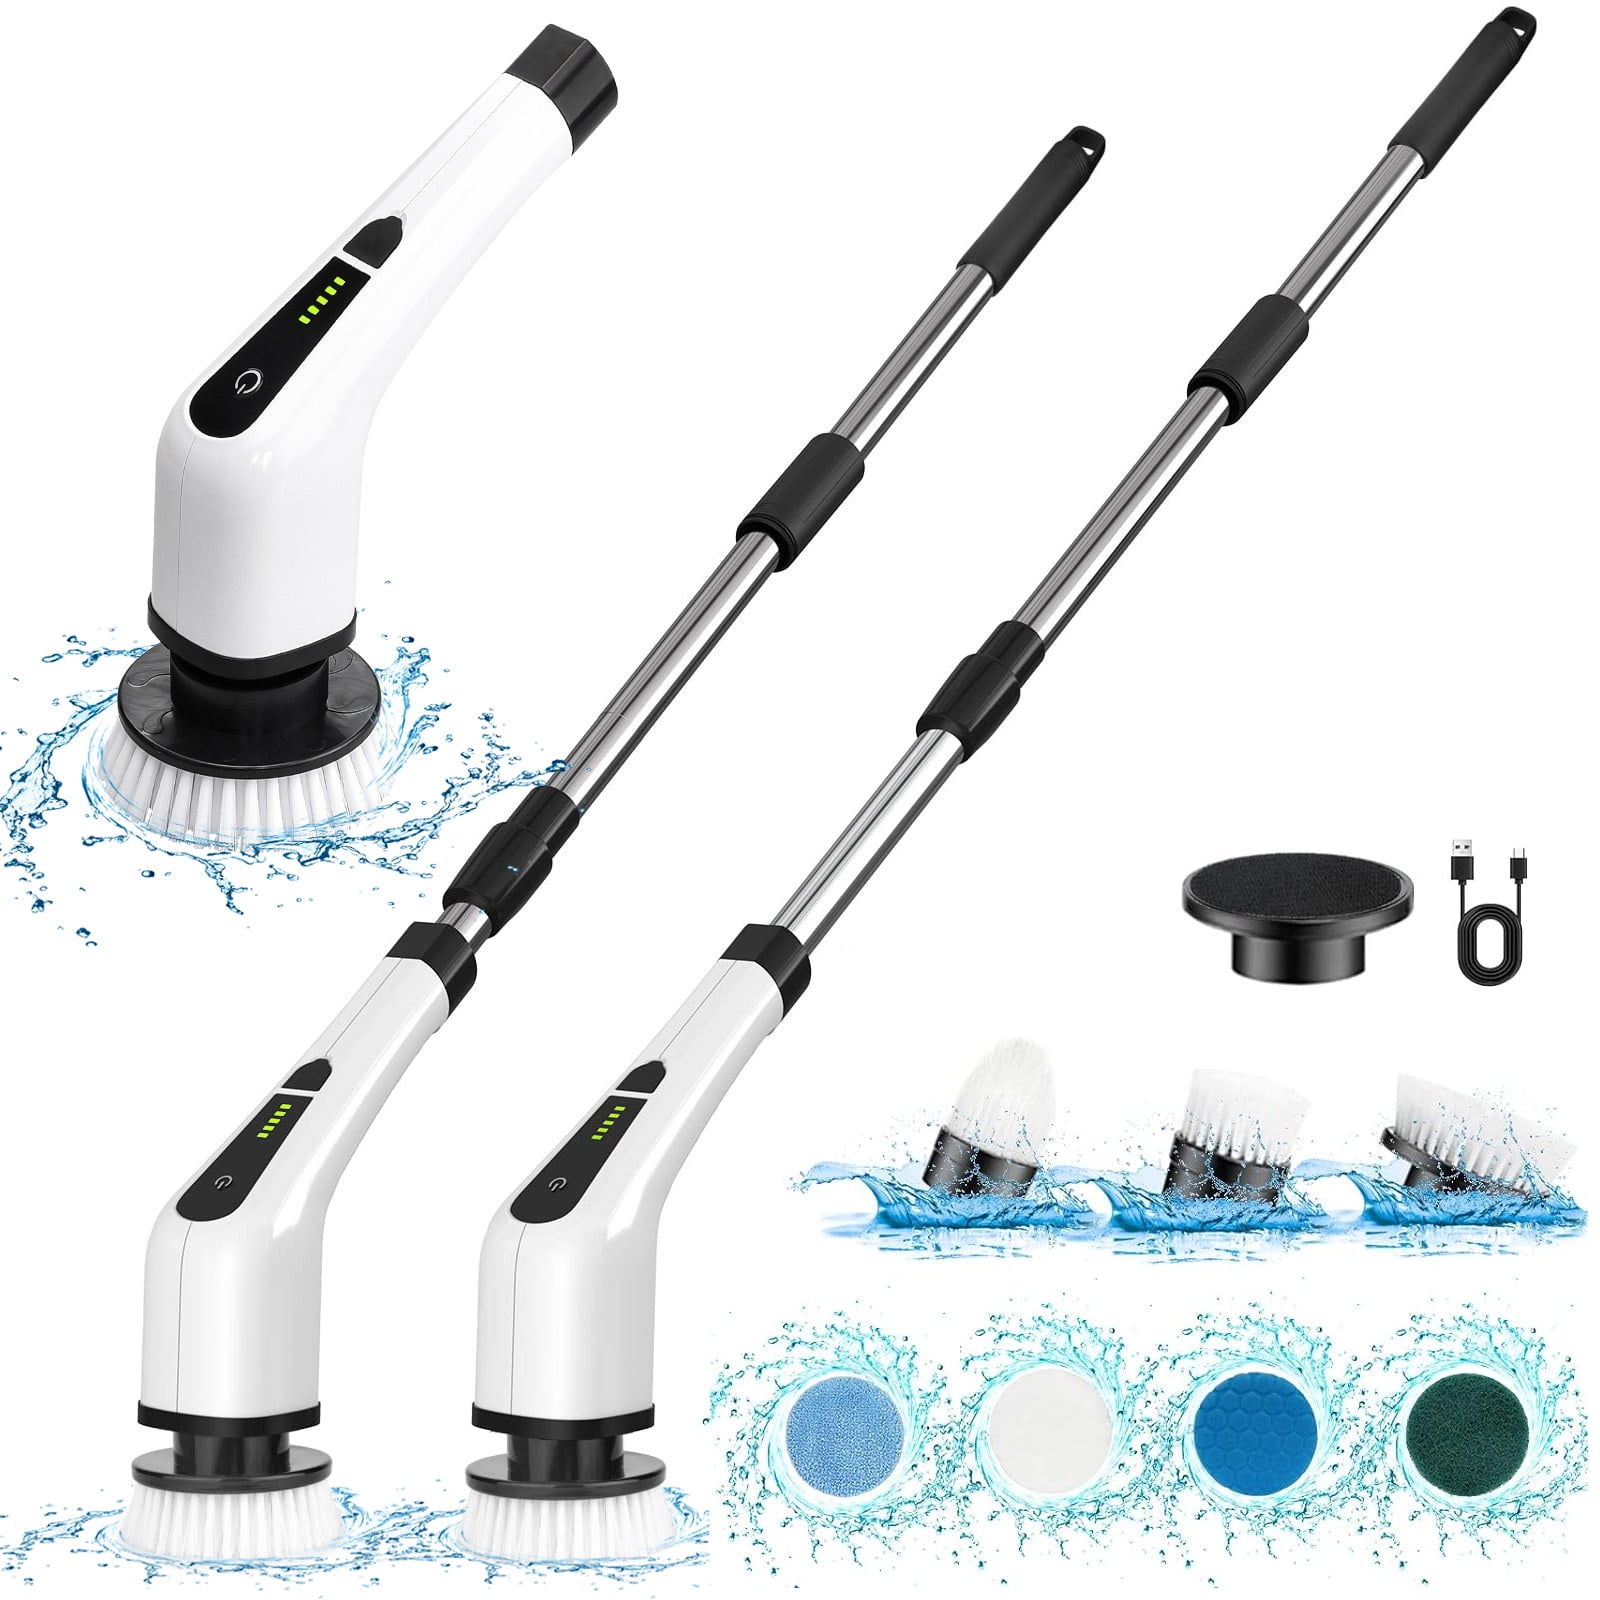  Electric Spin Scrubber, Cordless Bath Tub Scrubber with Long  Handle & 6 Replaceable Heads, Power Shower Cleaning Brush Fast Charging,  High-Speed for Bathtub Tile Sink Bathroom Kitchen : Home & Kitchen